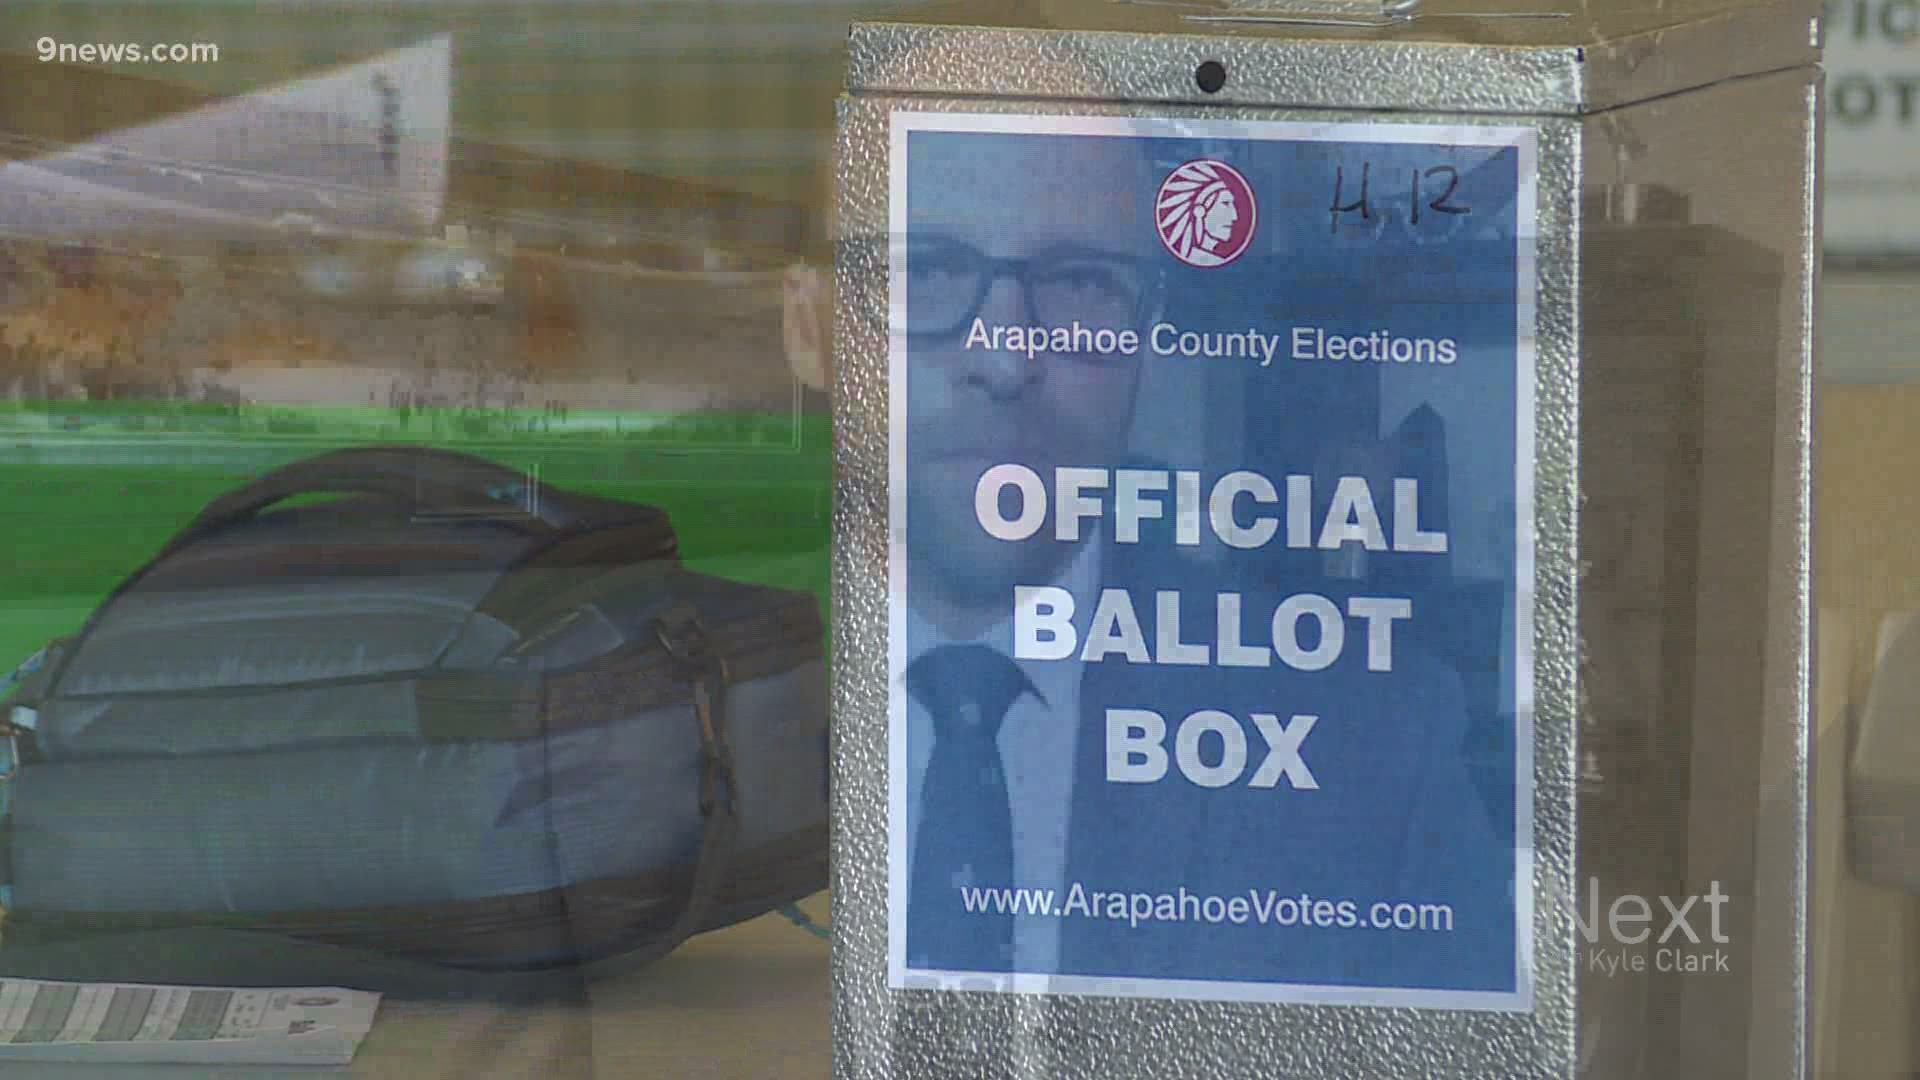 We should have a good idea of how Colorado voted by Tuesday at 7 p.m., but numbers won't be final then. Here's a look at the state's ballot process.